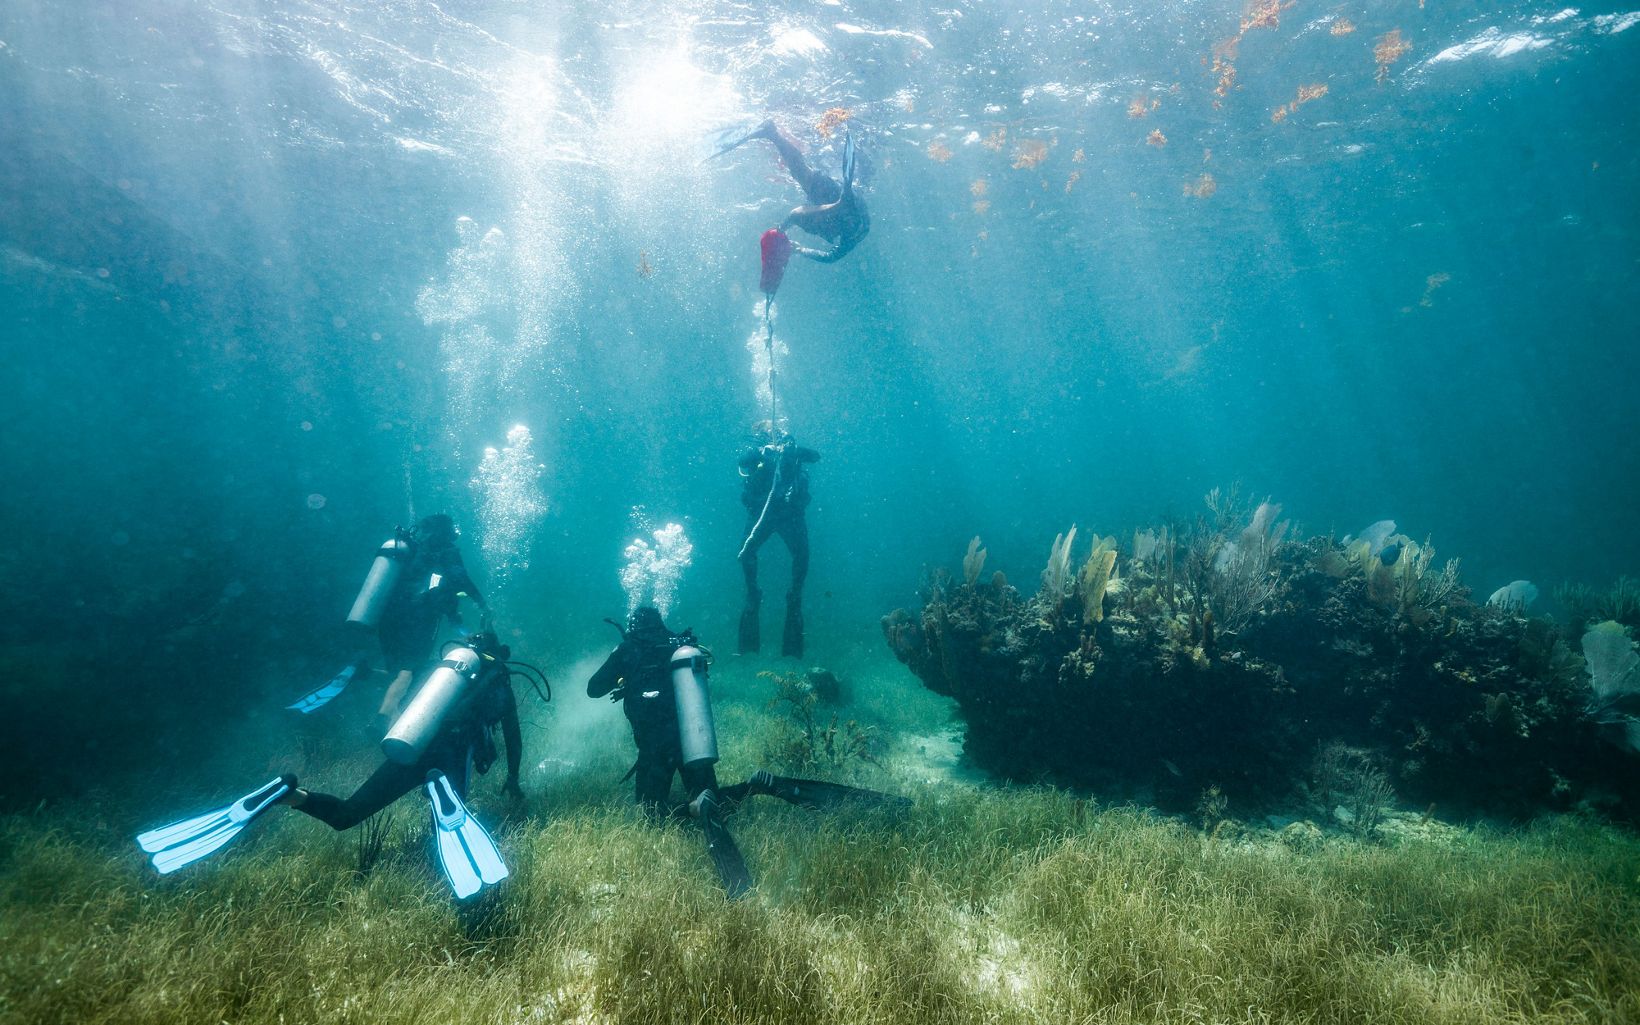 Reef Rescue Volunteer divers practice using an inflatable lift bag to move heavy debris off coral reefs after a hurricane. © Jennifer Adler